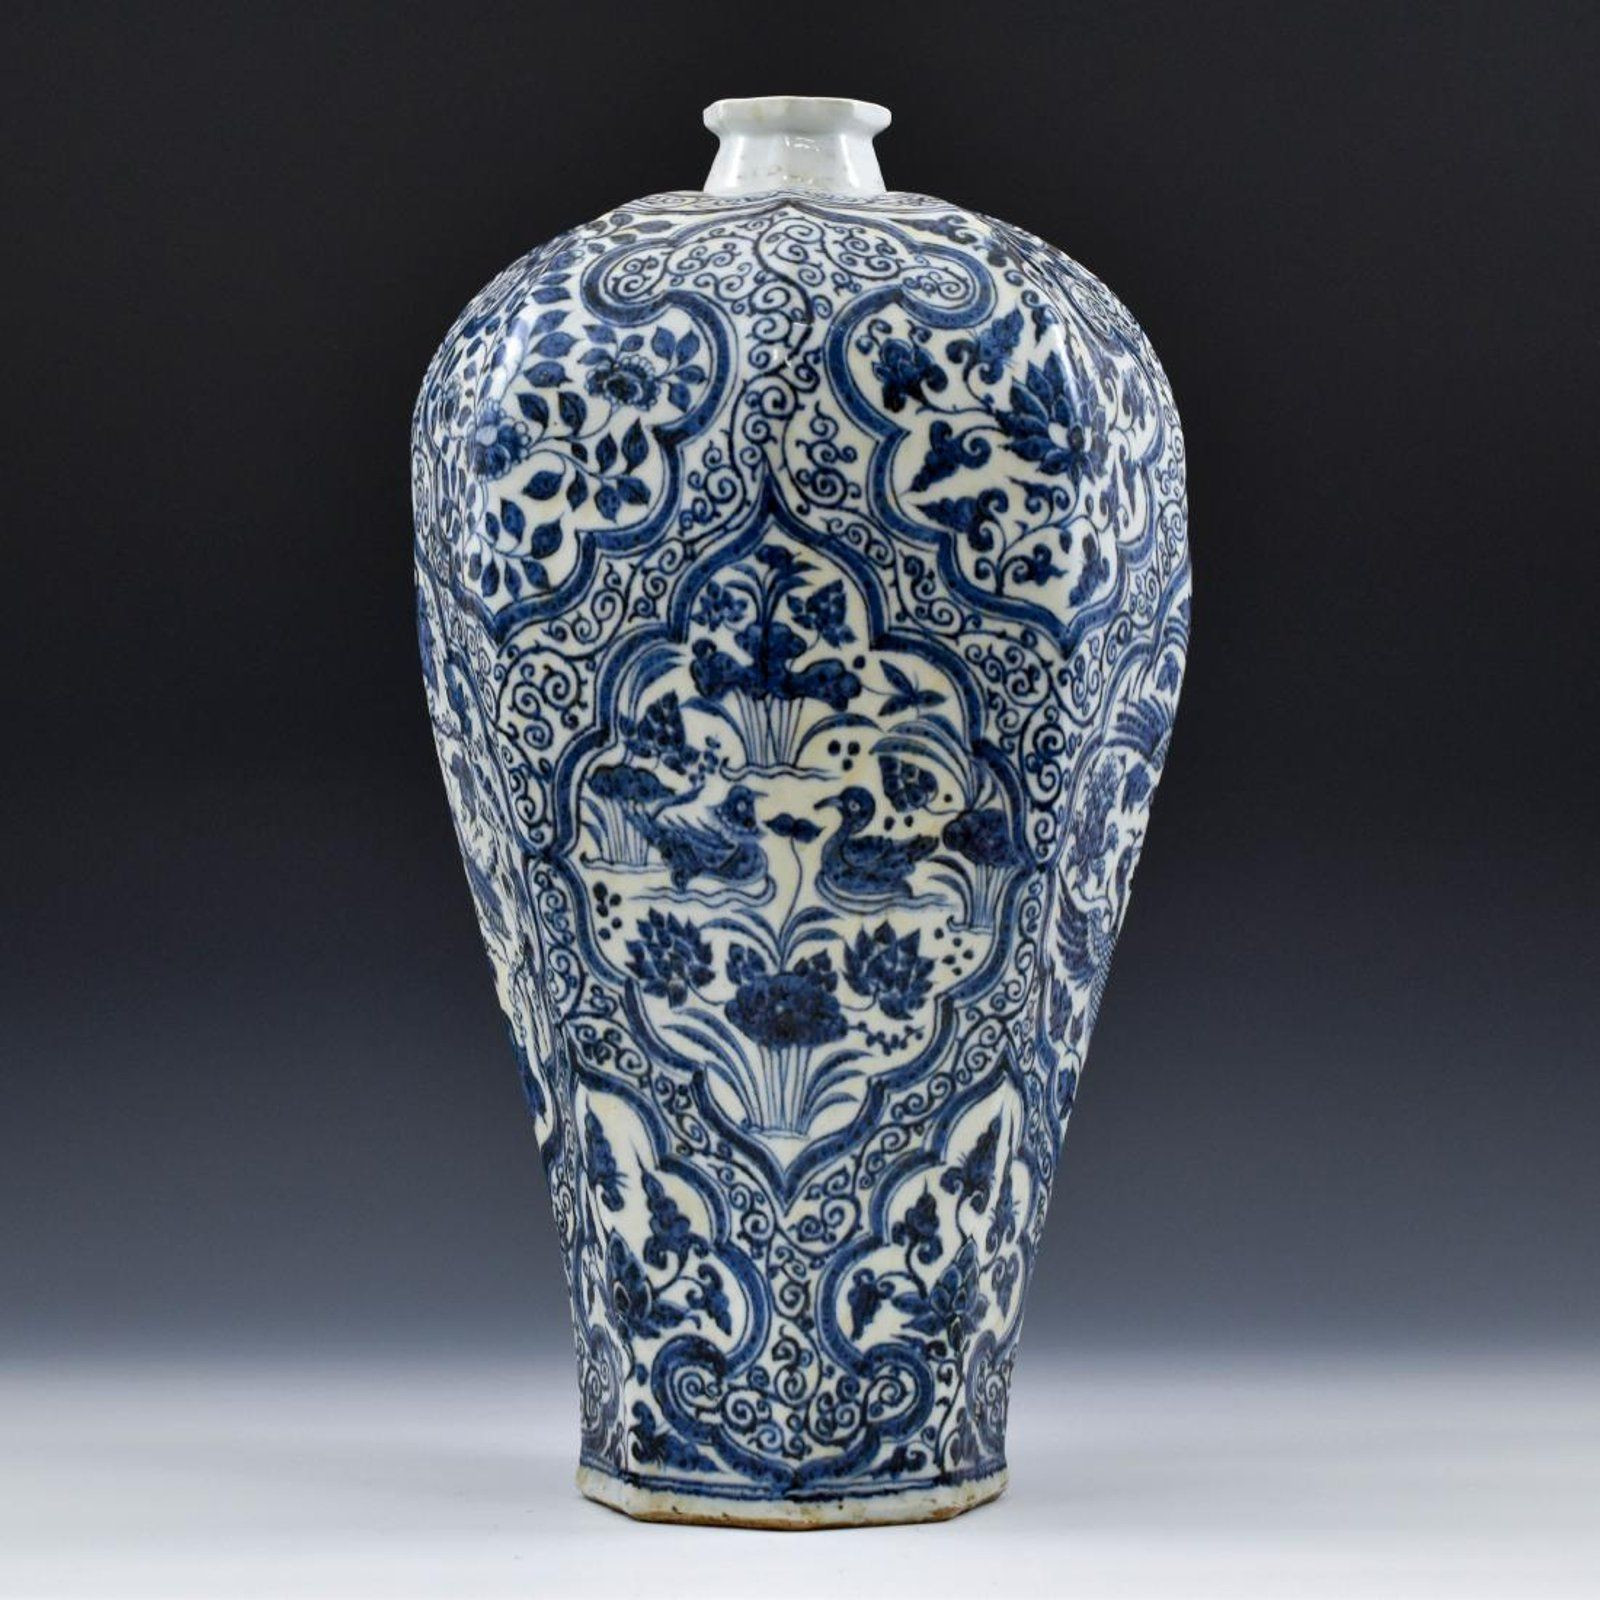 art nouveau vases for sale of 23 blue crystal vase the weekly world in ming dynasty blue and white octagonal meiping vase